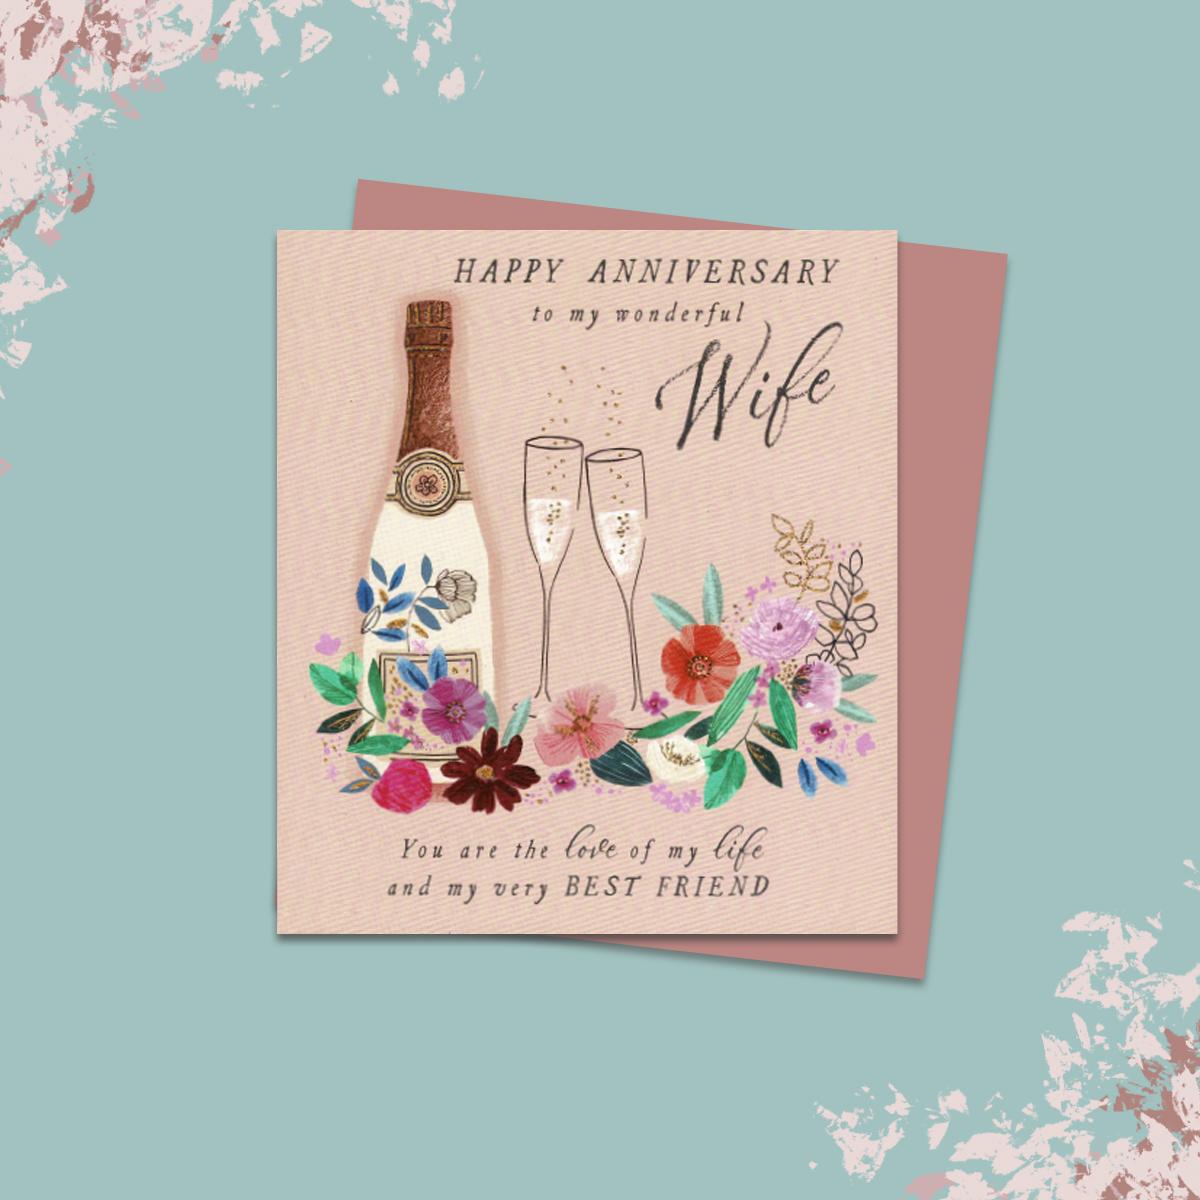 Wife Anniversary Card Alongside Its Rose Gold Envelope